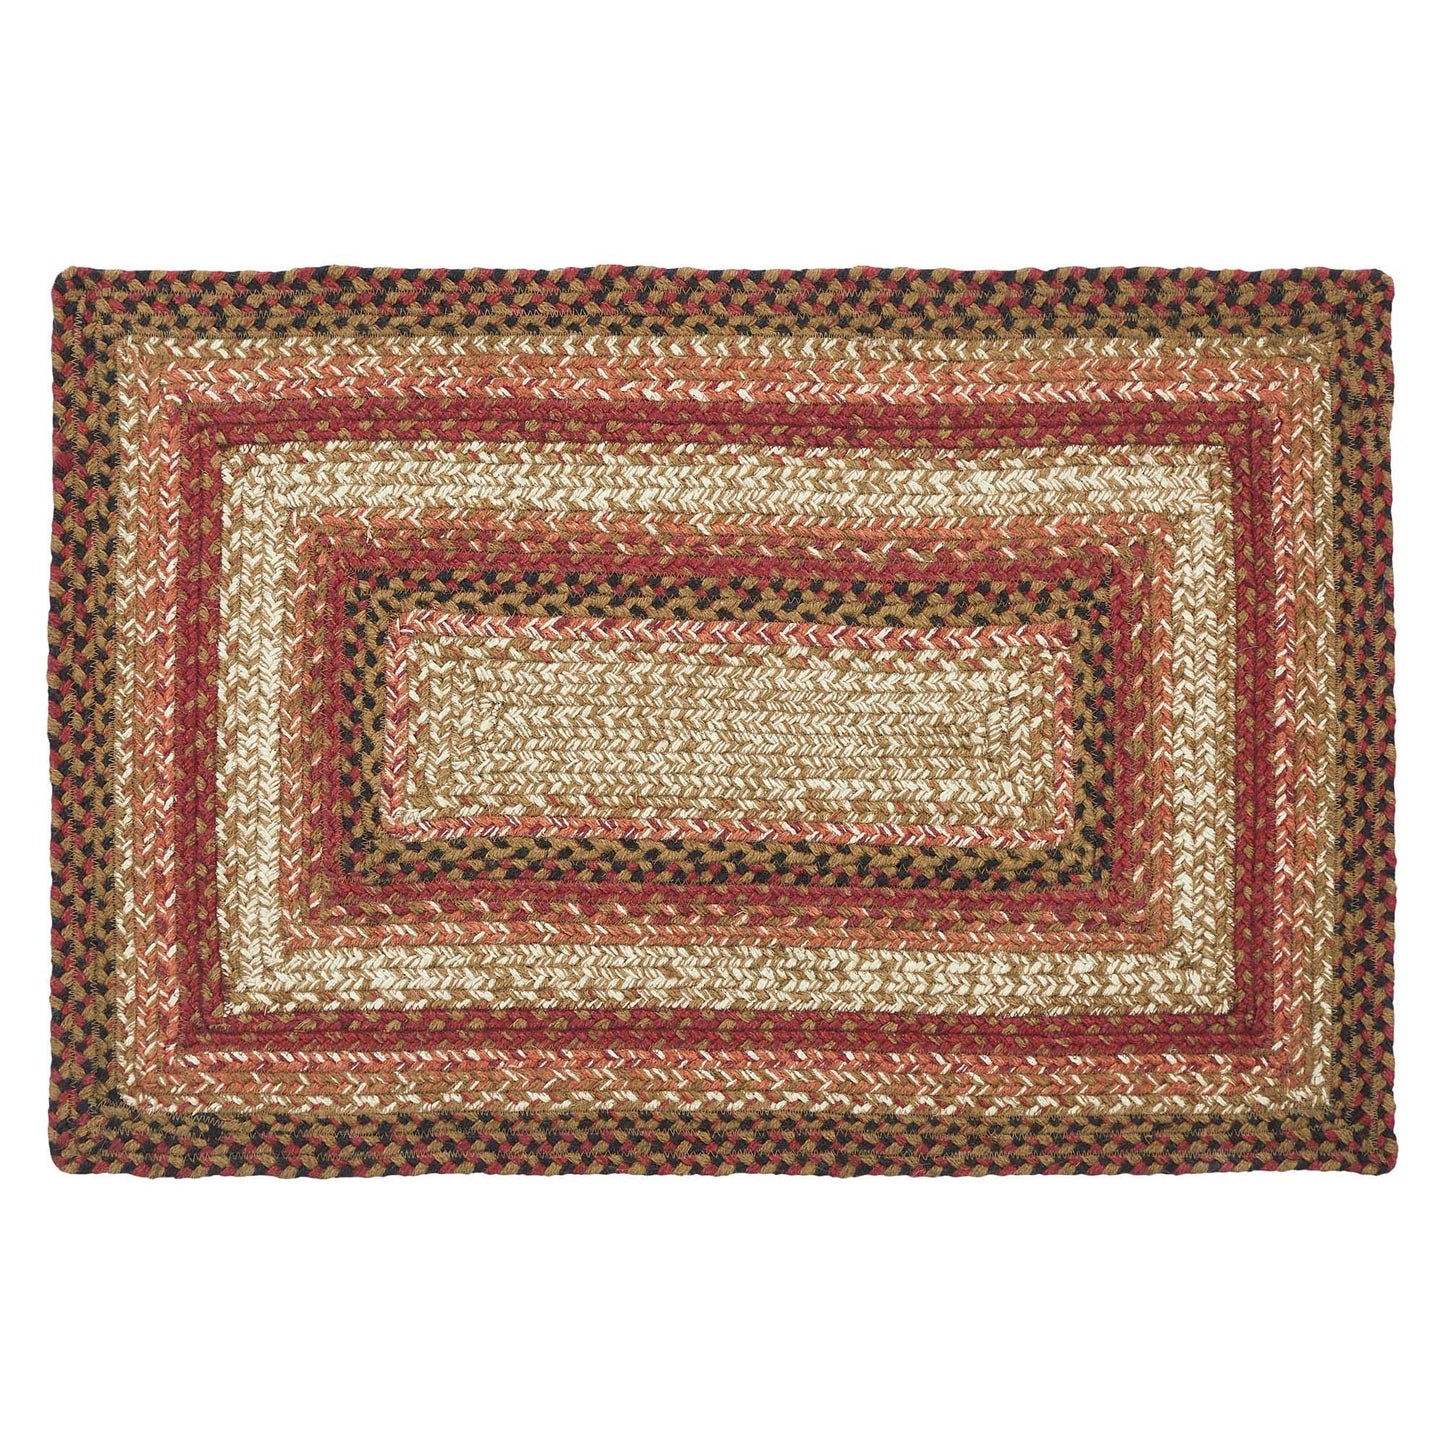 67117-Ginger-Spice-Jute-Rug-Rect-w-Pad-20x30-image-6